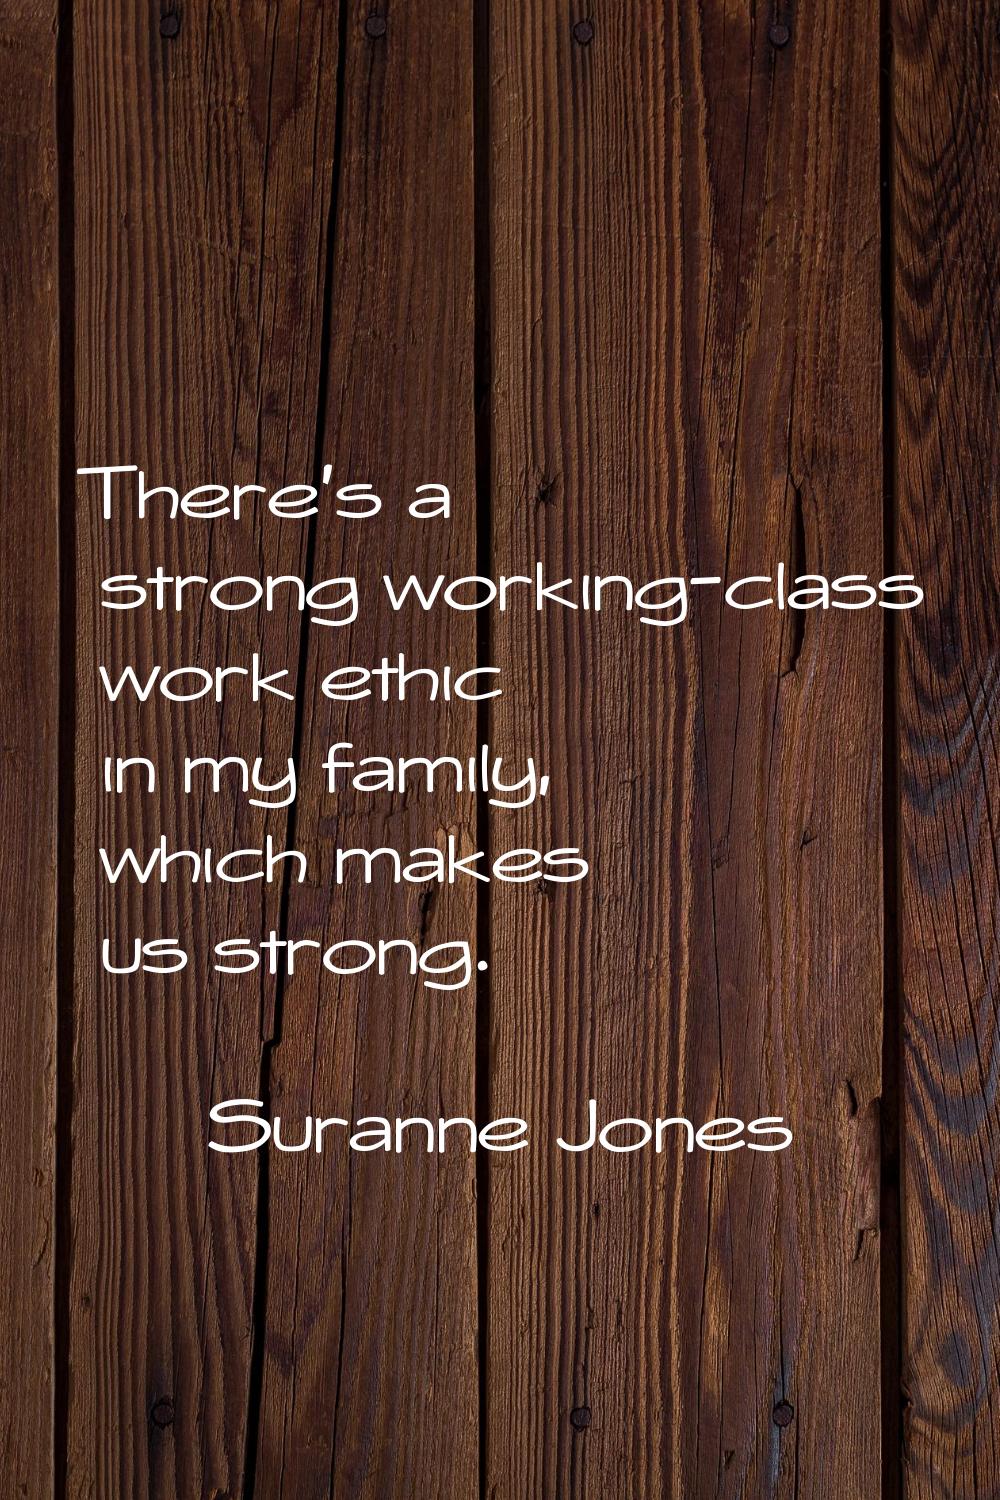 There's a strong working-class work ethic in my family, which makes us strong.